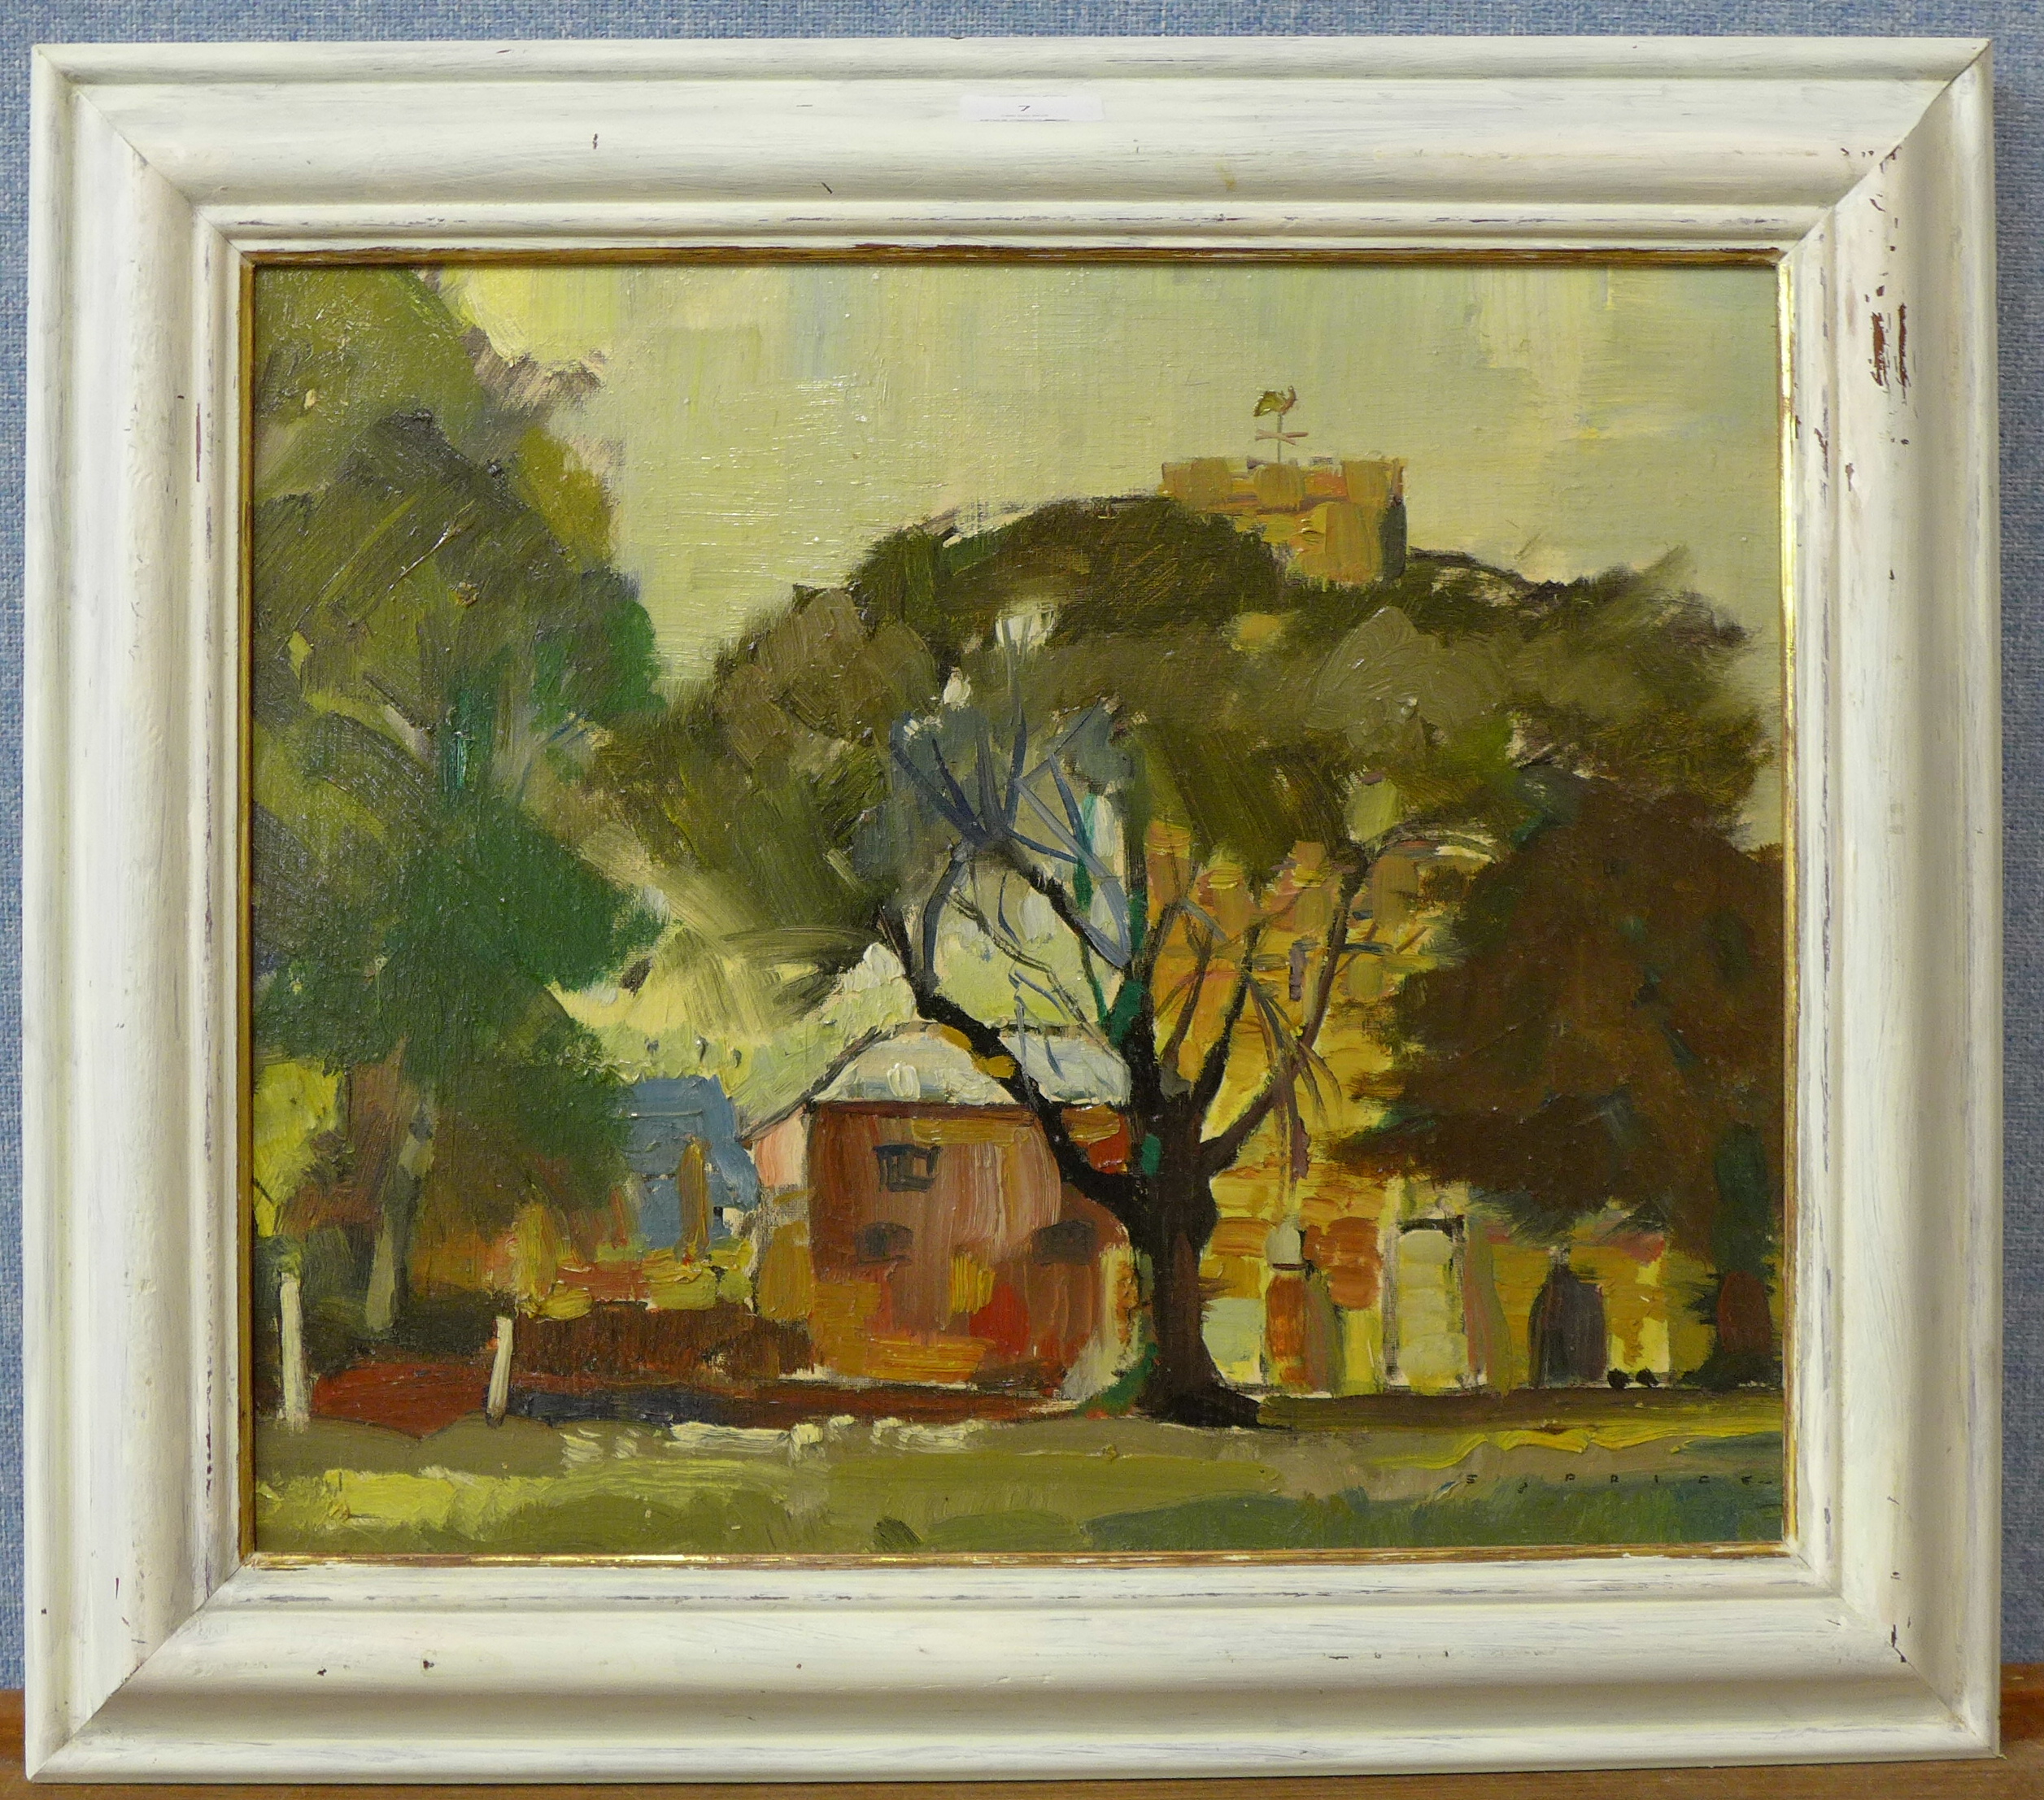 Stan Price, Strelley Church, Nottinghamshire, palette knife oil on board, 34 x 40cms, - Image 2 of 2